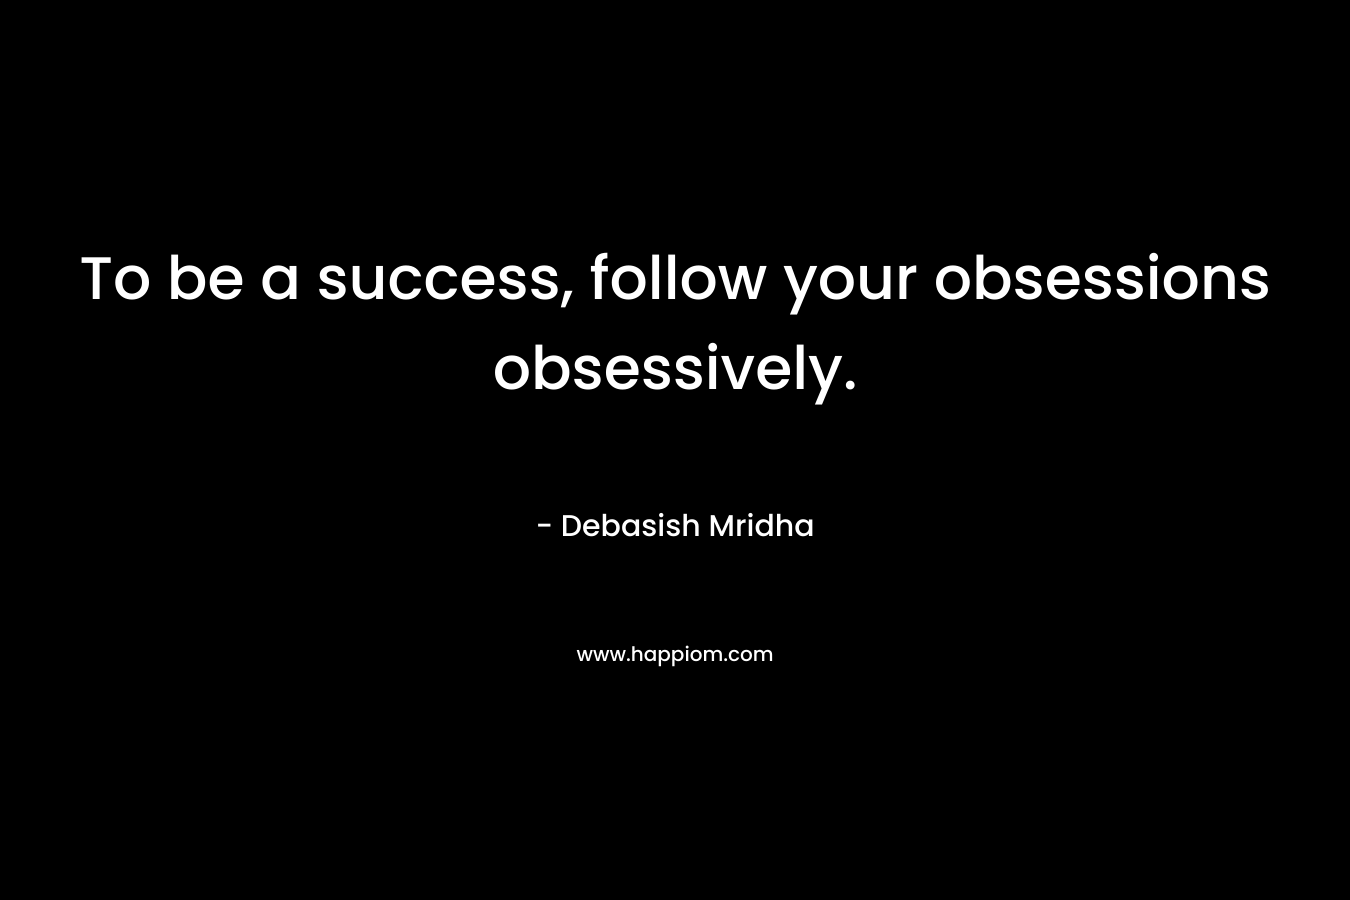 To be a success, follow your obsessions obsessively.